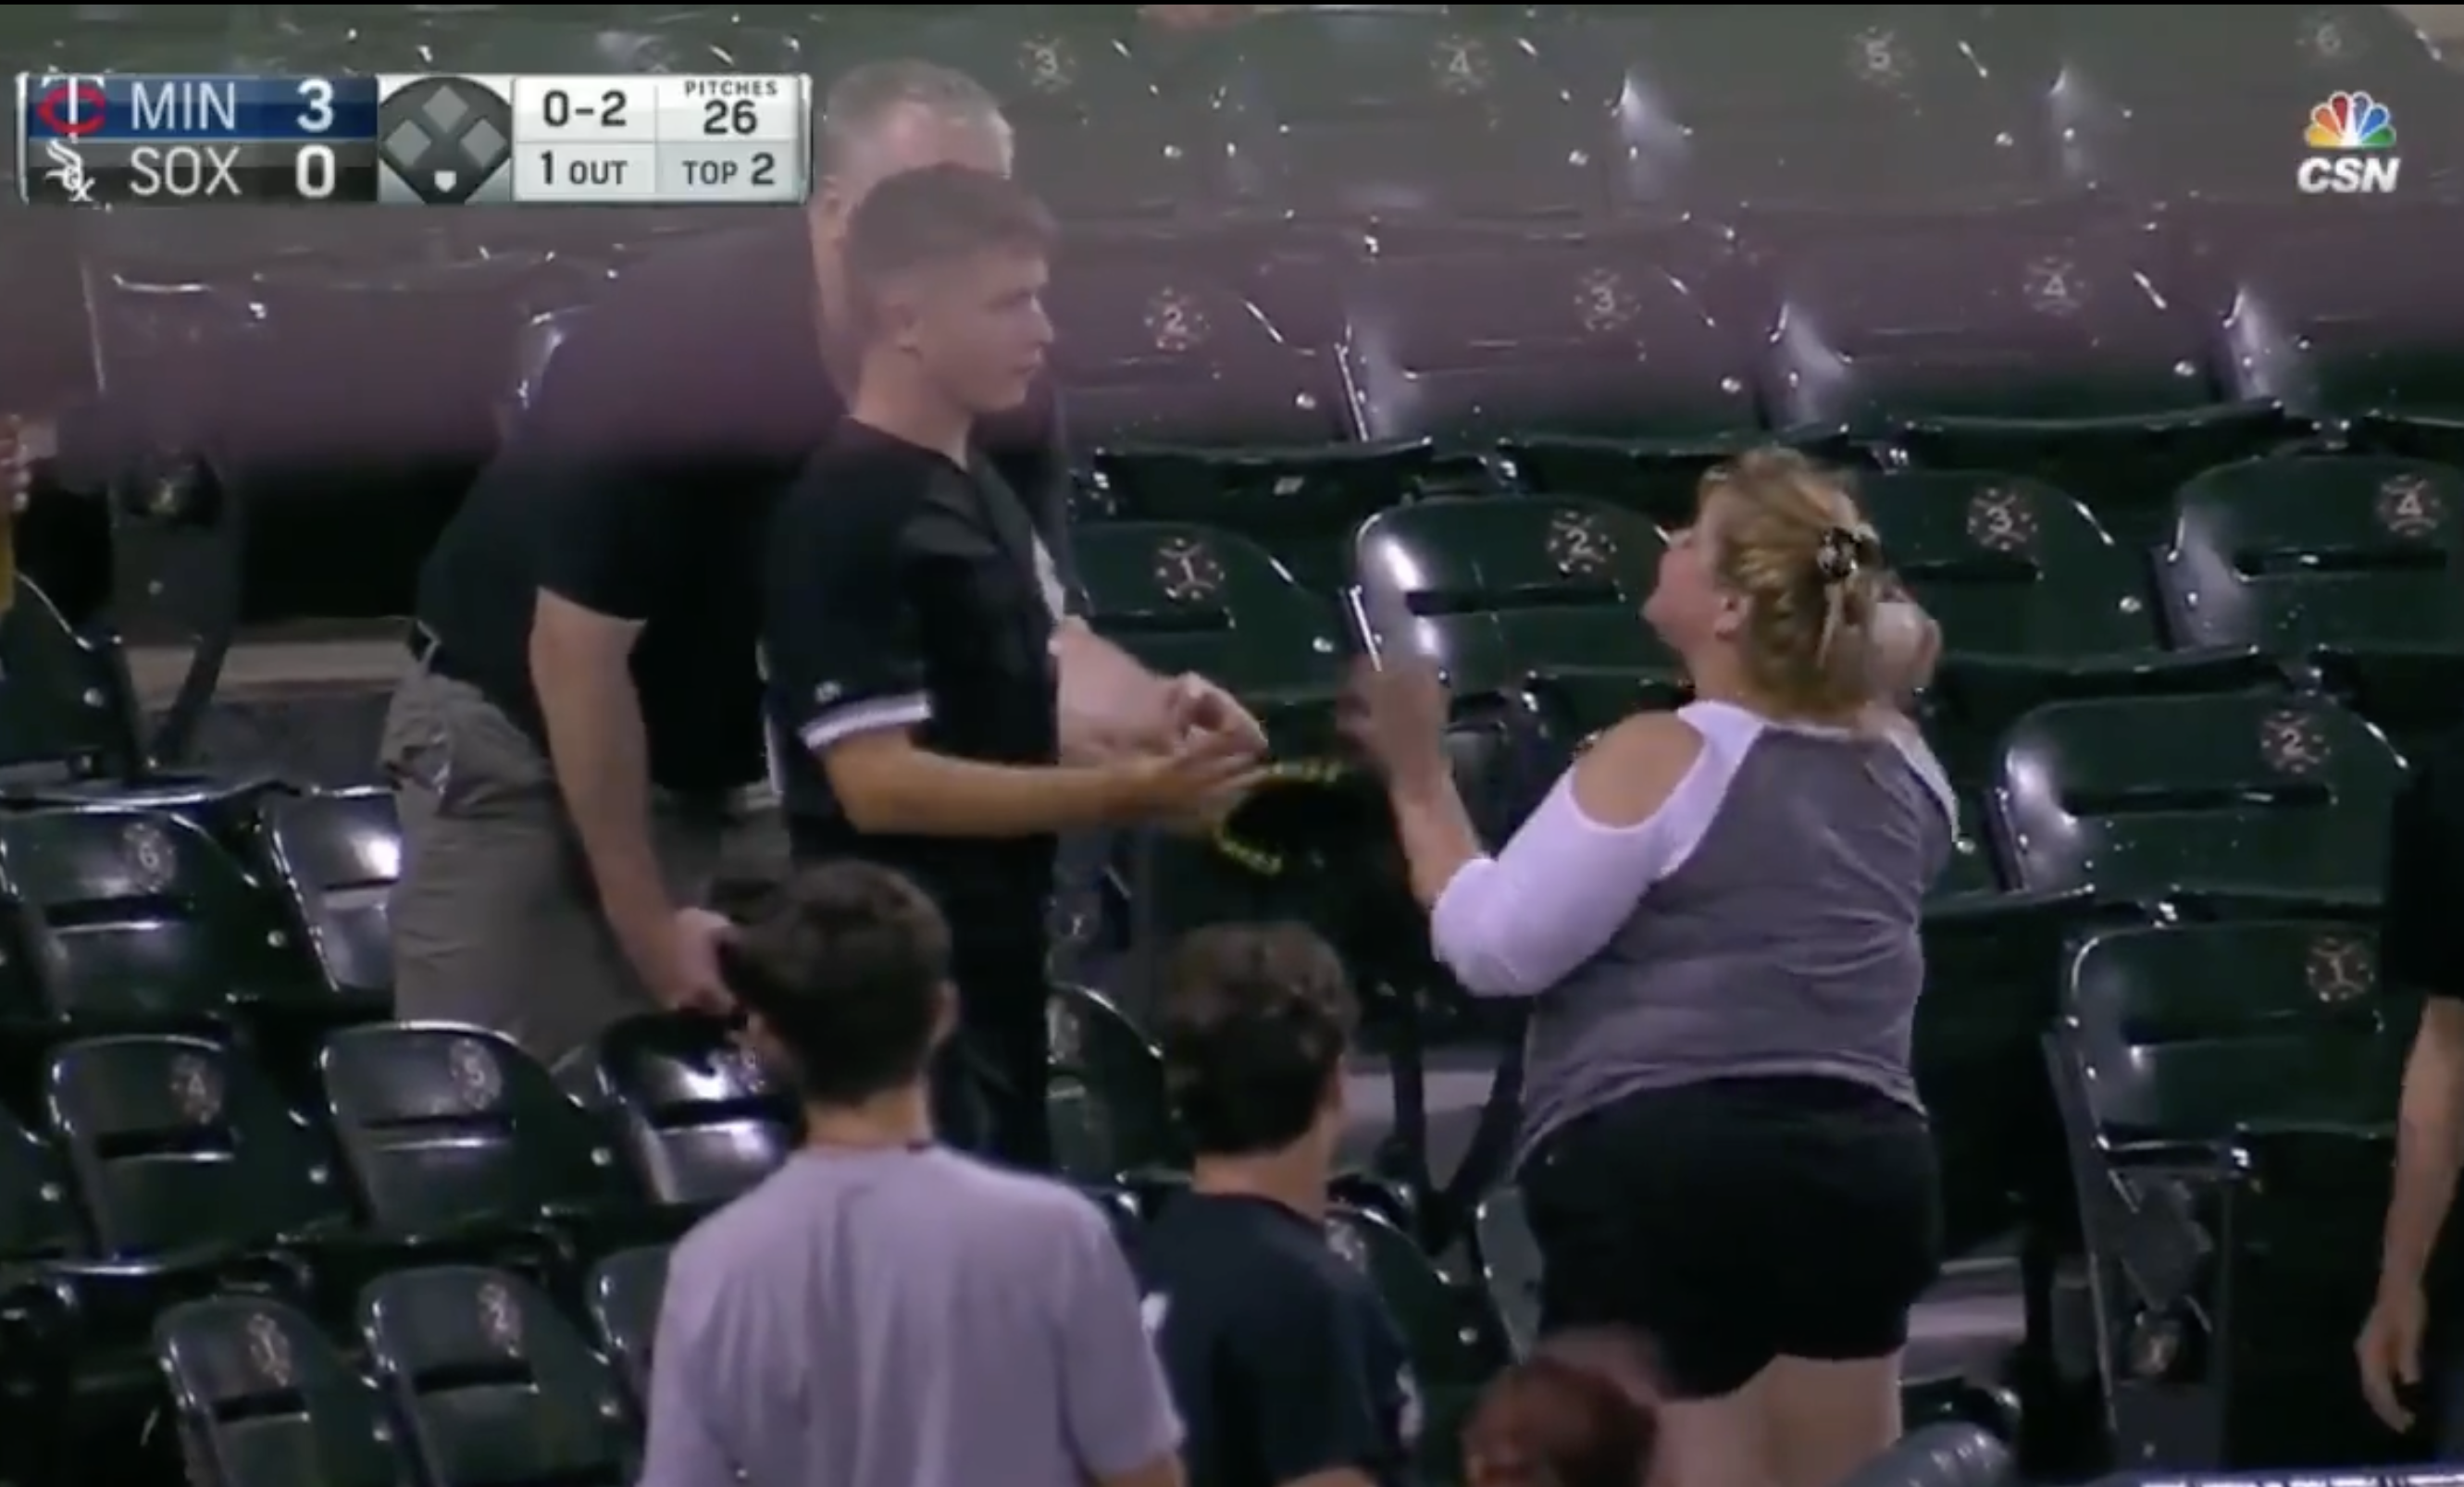 woman talking to a teen after she grabbed a baseball from his hand at a baseball game. 